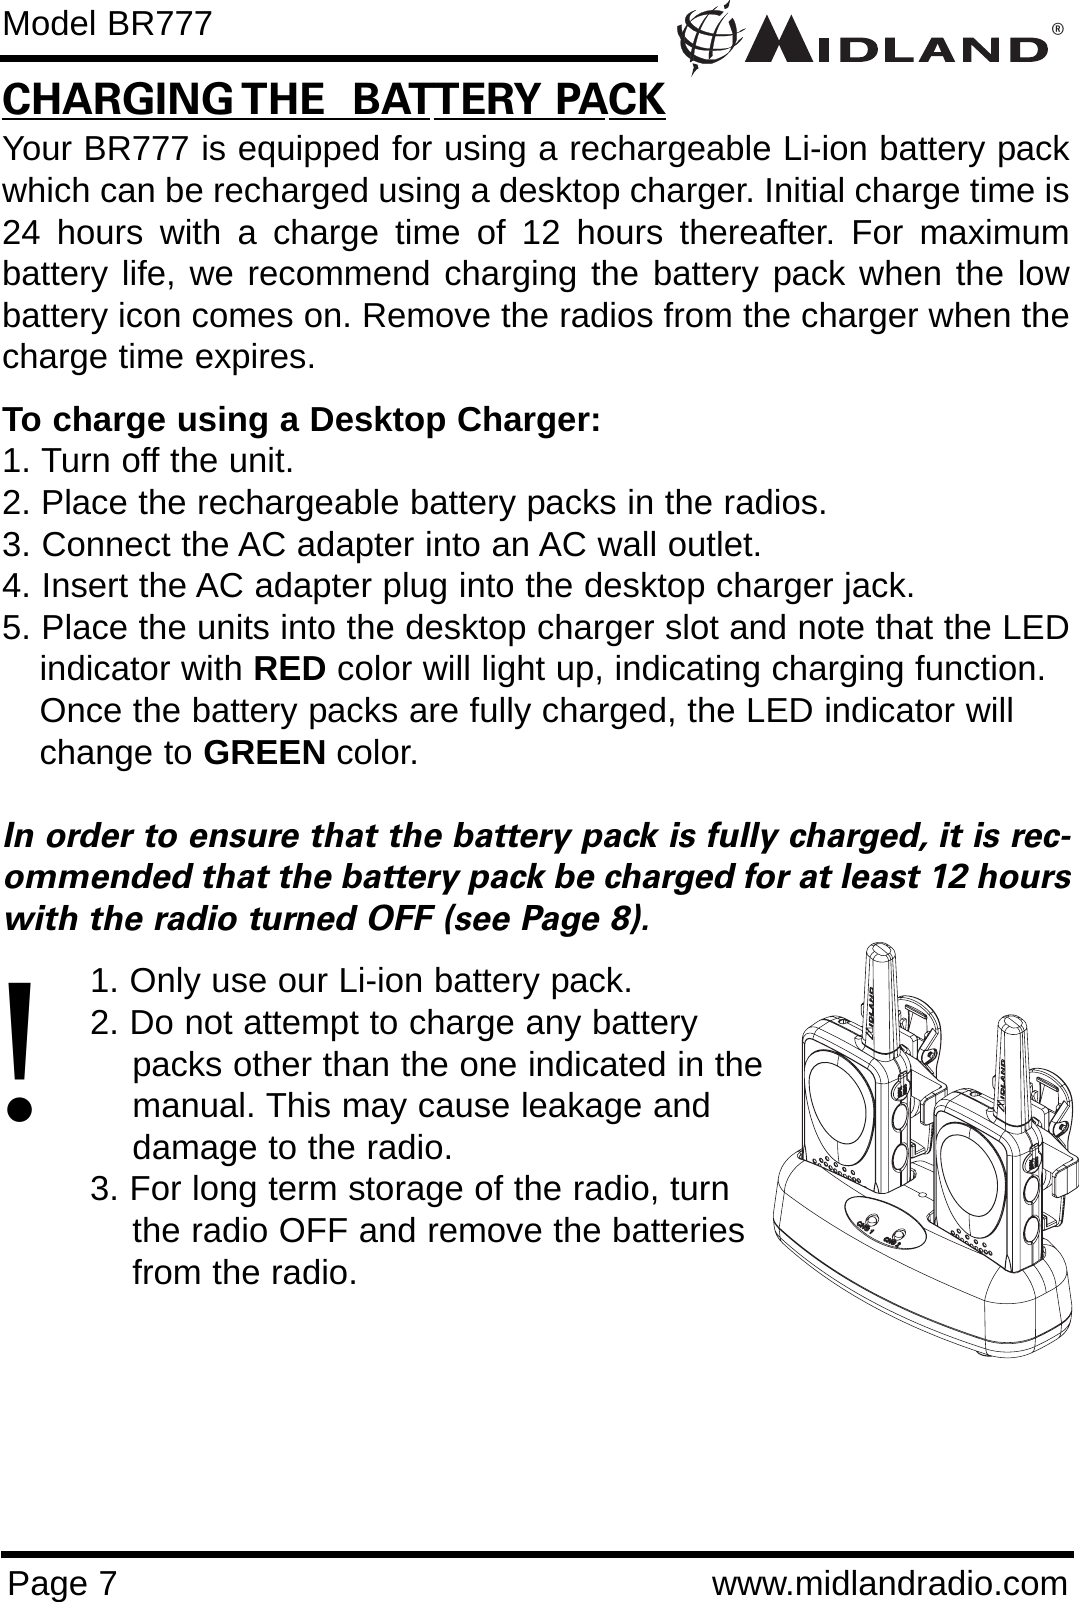 ®Page 7 www.midlandradio.comCHARGING THE  BATTERY PACKYour BR777 is equipped for using a rechargeable Li-ion battery packwhich can be recharged using a desktop charger. Initial charge time is24 hours with a charge time of 12 hours thereafter. For maximumbattery life, we recommend charging the battery pack when the lowbattery icon comes on. Remove the radios from the charger when thecharge time expires.To charge using a Desktop Charger:1. Turn off the unit.2. Place the rechargeable battery packs in the radios.3. Connect the AC adapter into an AC wall outlet.4. Insert the AC adapter plug into the desktop charger jack.5. Place the units into the desktop charger slot and note that the LEDindicator with RED color will light up, indicating charging function. Once the battery packs are fully charged, the LED indicator will change to GREEN color. In order to ensure that the battery pack is fully charged, it is rec-ommended that the battery pack be charged for at least 12 hourswith the radio turned OFF (see Page 8).1. Only use our Li-ion battery pack.2. Do not attempt to charge any battery packs other than the one indicated in themanual. This may cause leakage and damage to the radio.3. For long term storage of the radio, turn the radio OFF and remove the batteries from the radio.Model BR777!